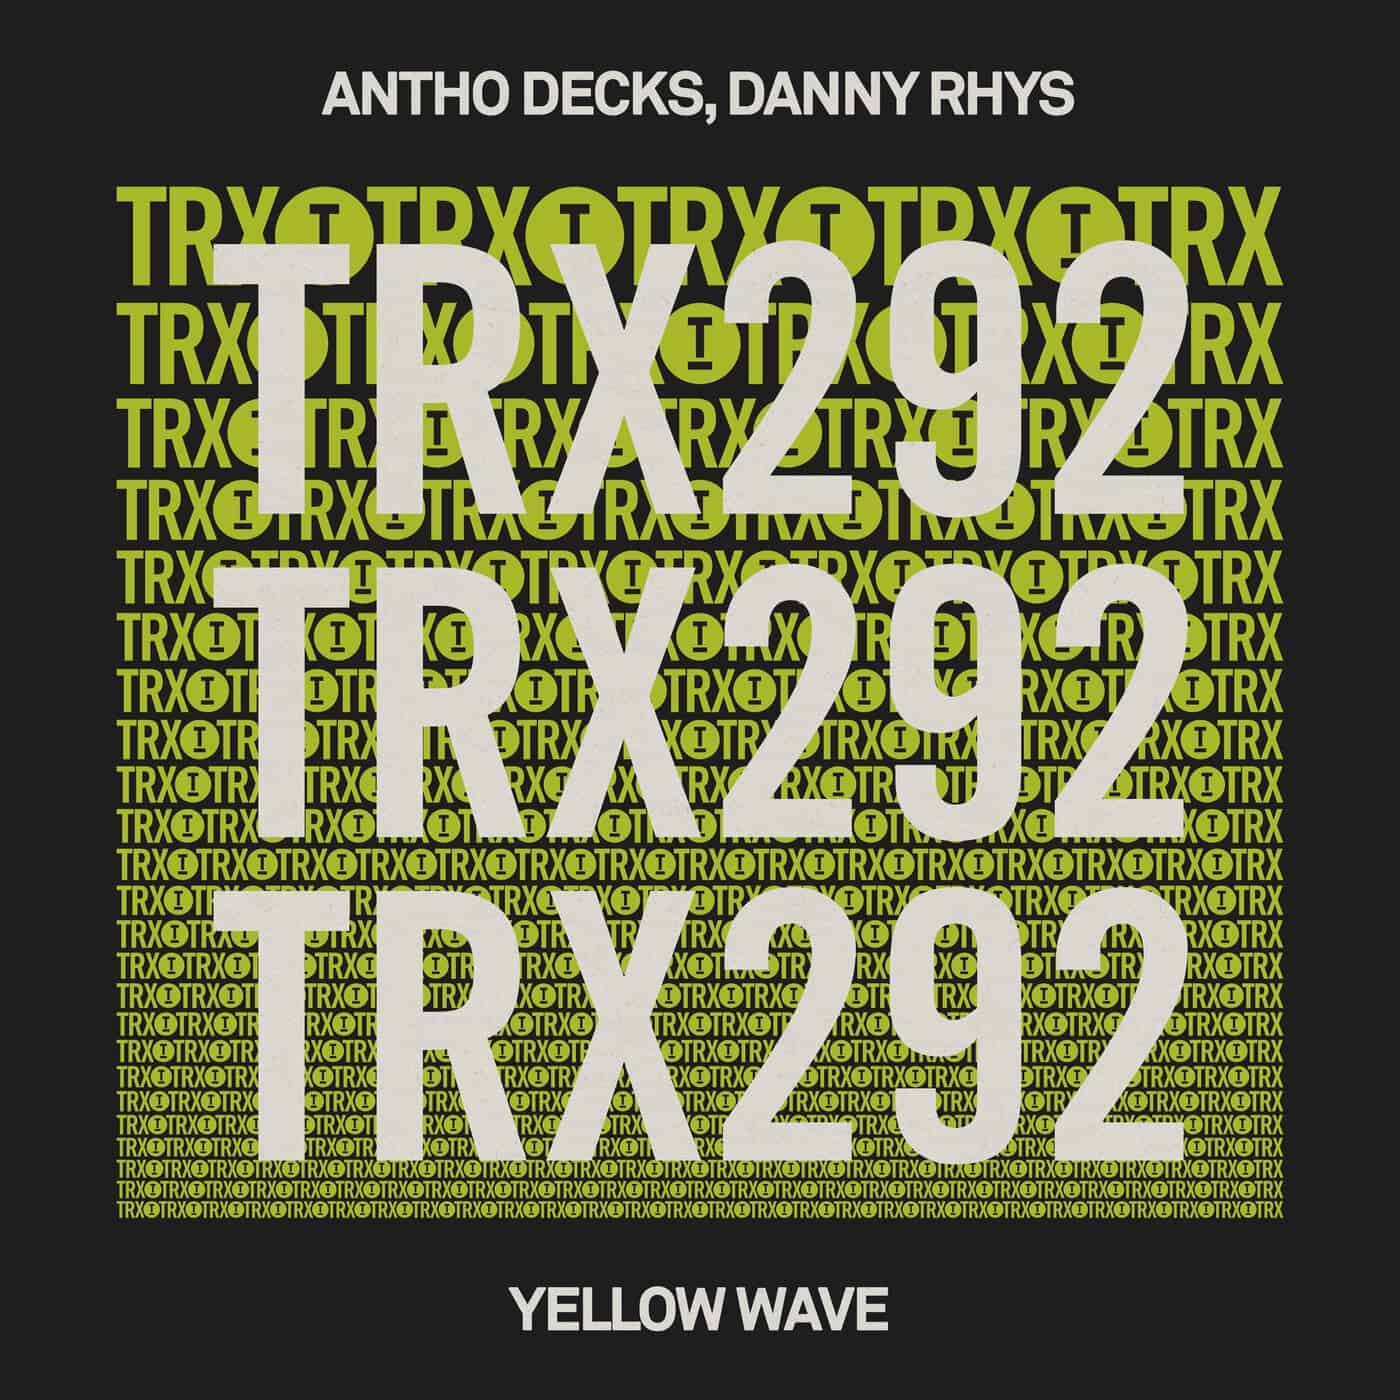 image cover: Yellow Wave by Antho Decks, Danny Rhys on Toolroom Trax